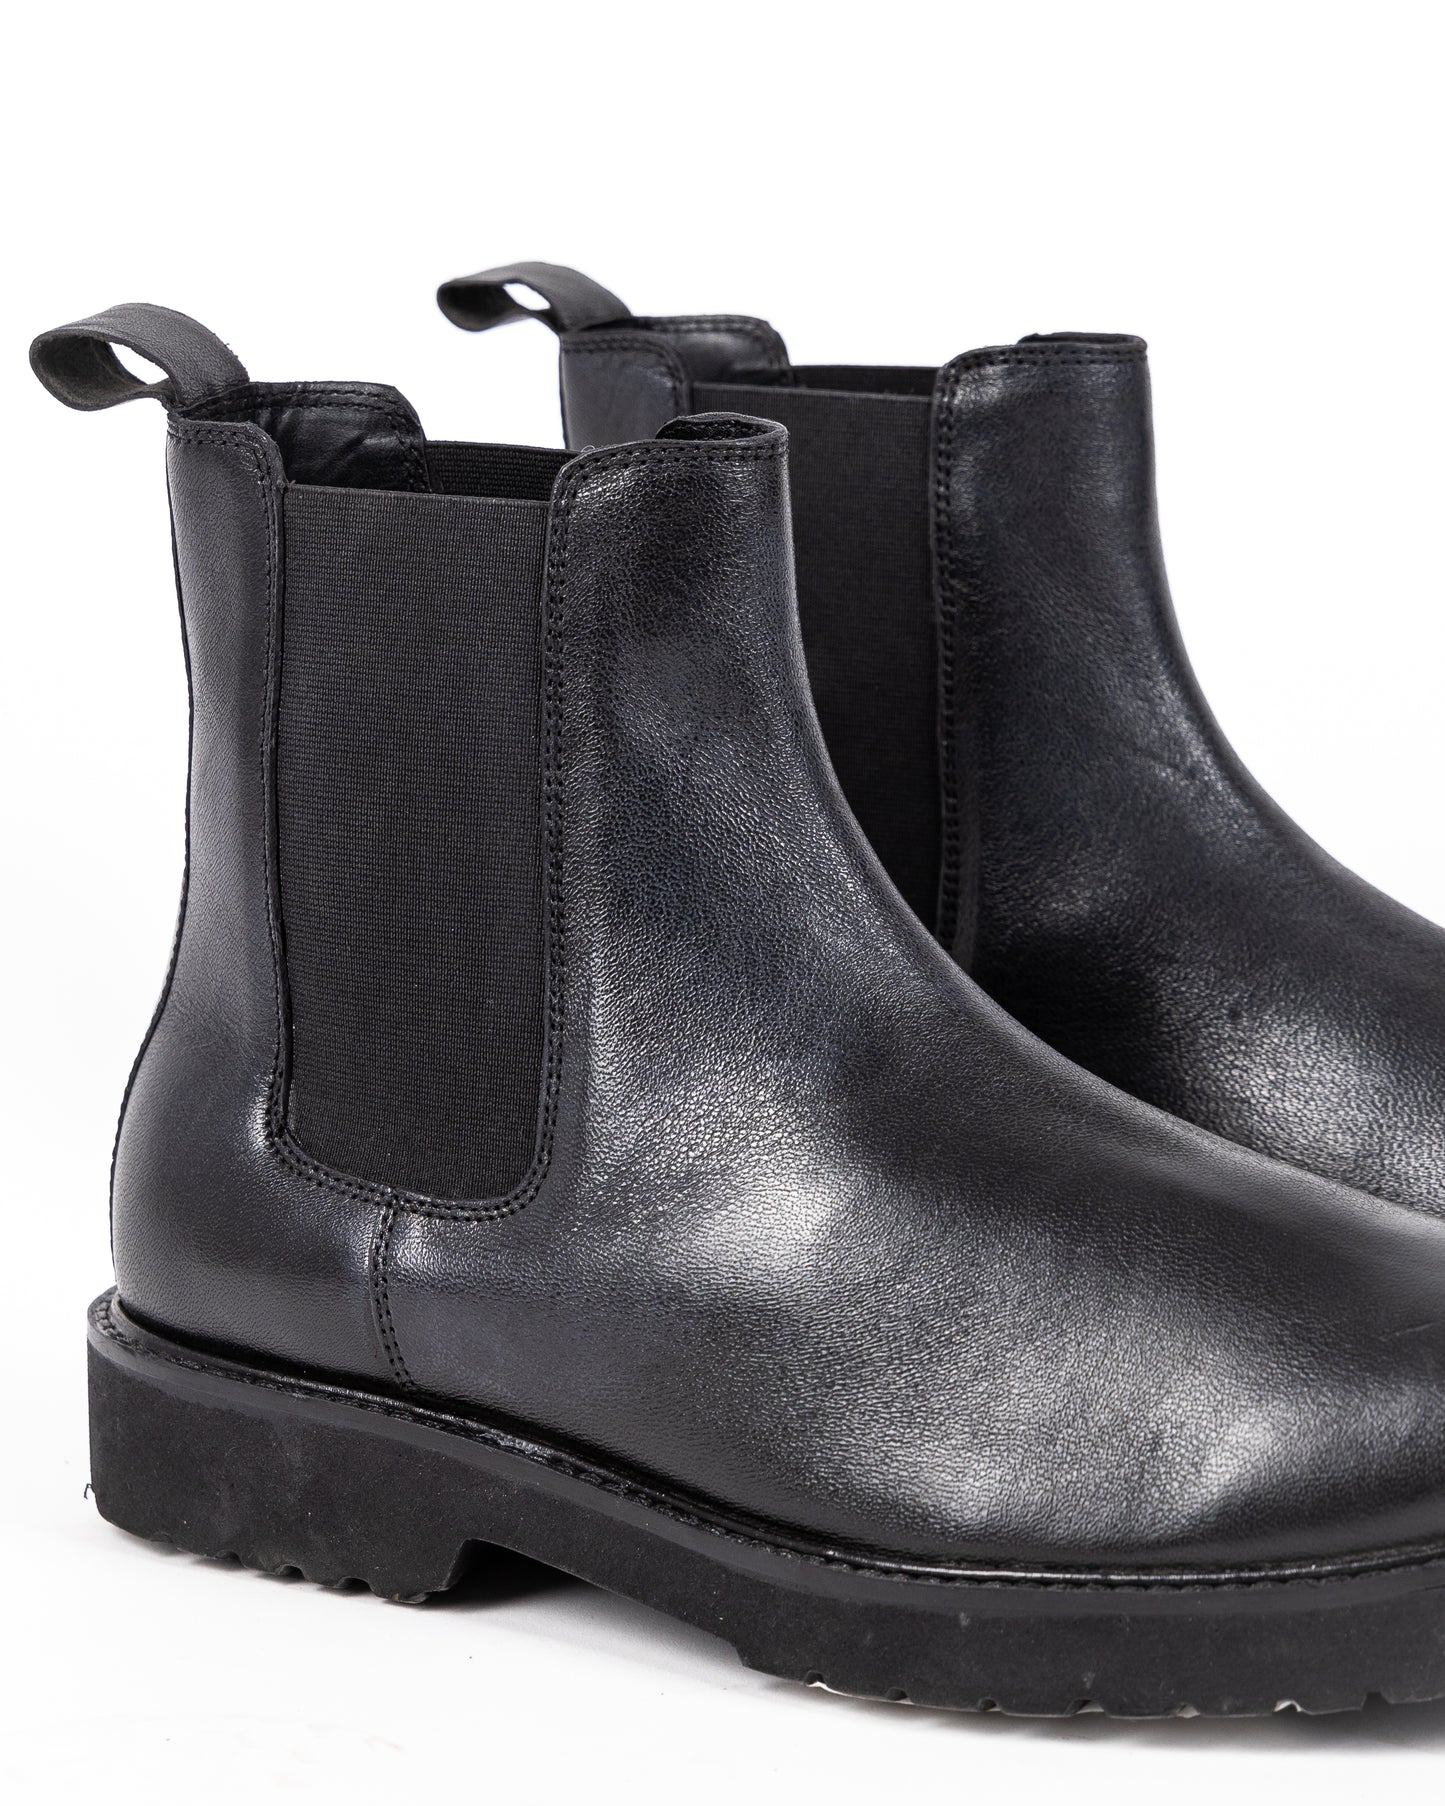 Chunky Black Chelsea Boots